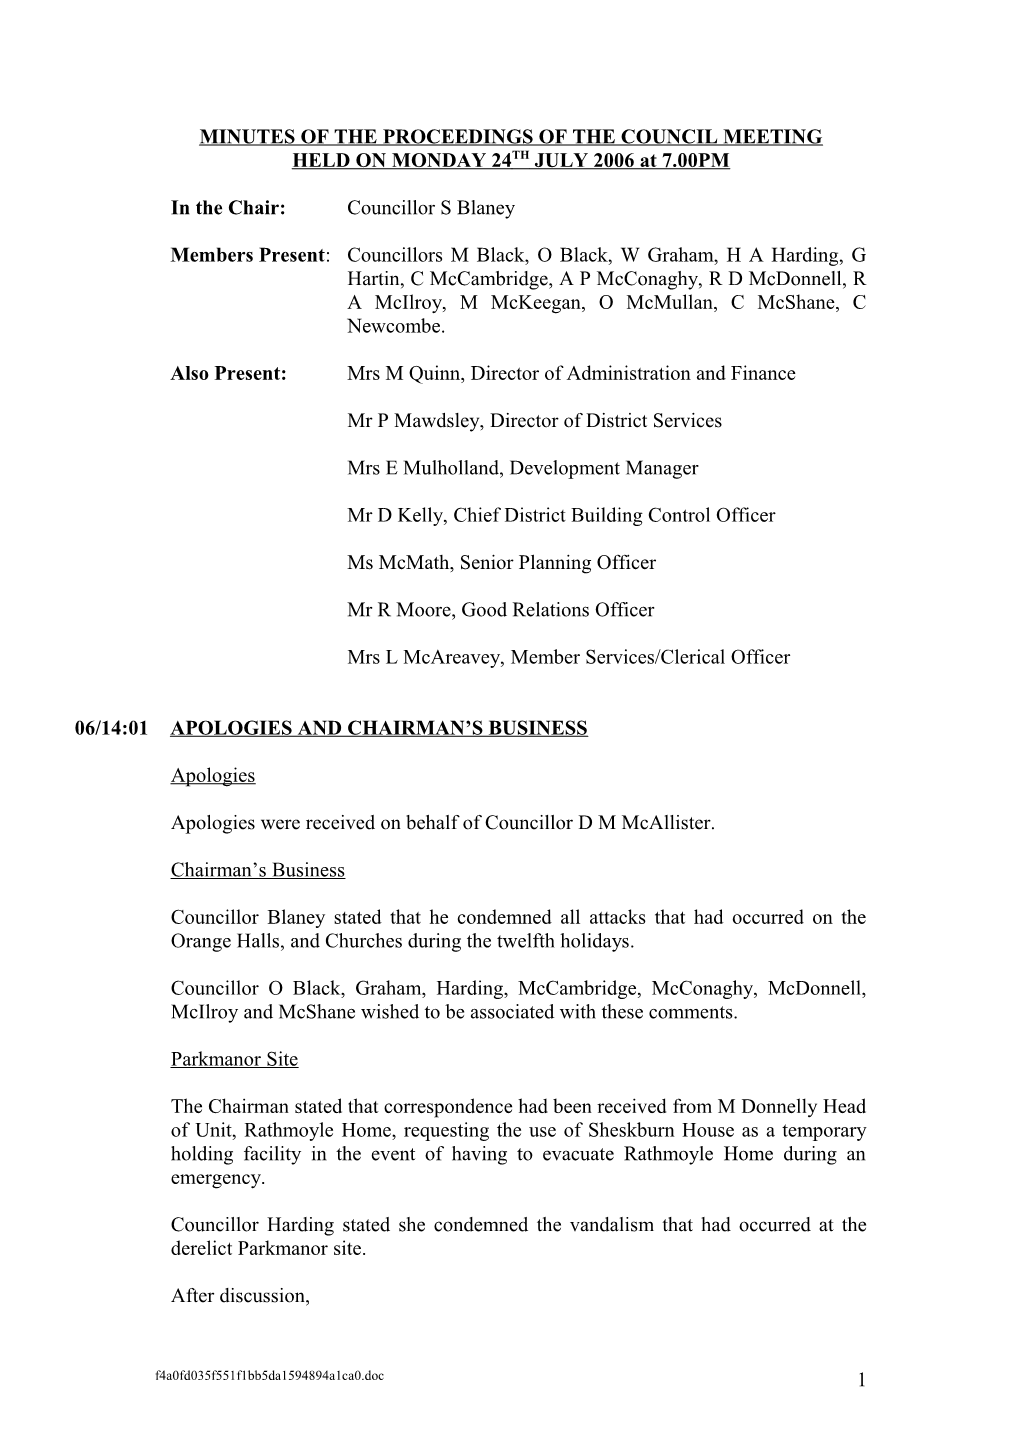 Minutes of the Proceedings of the Council Meeting